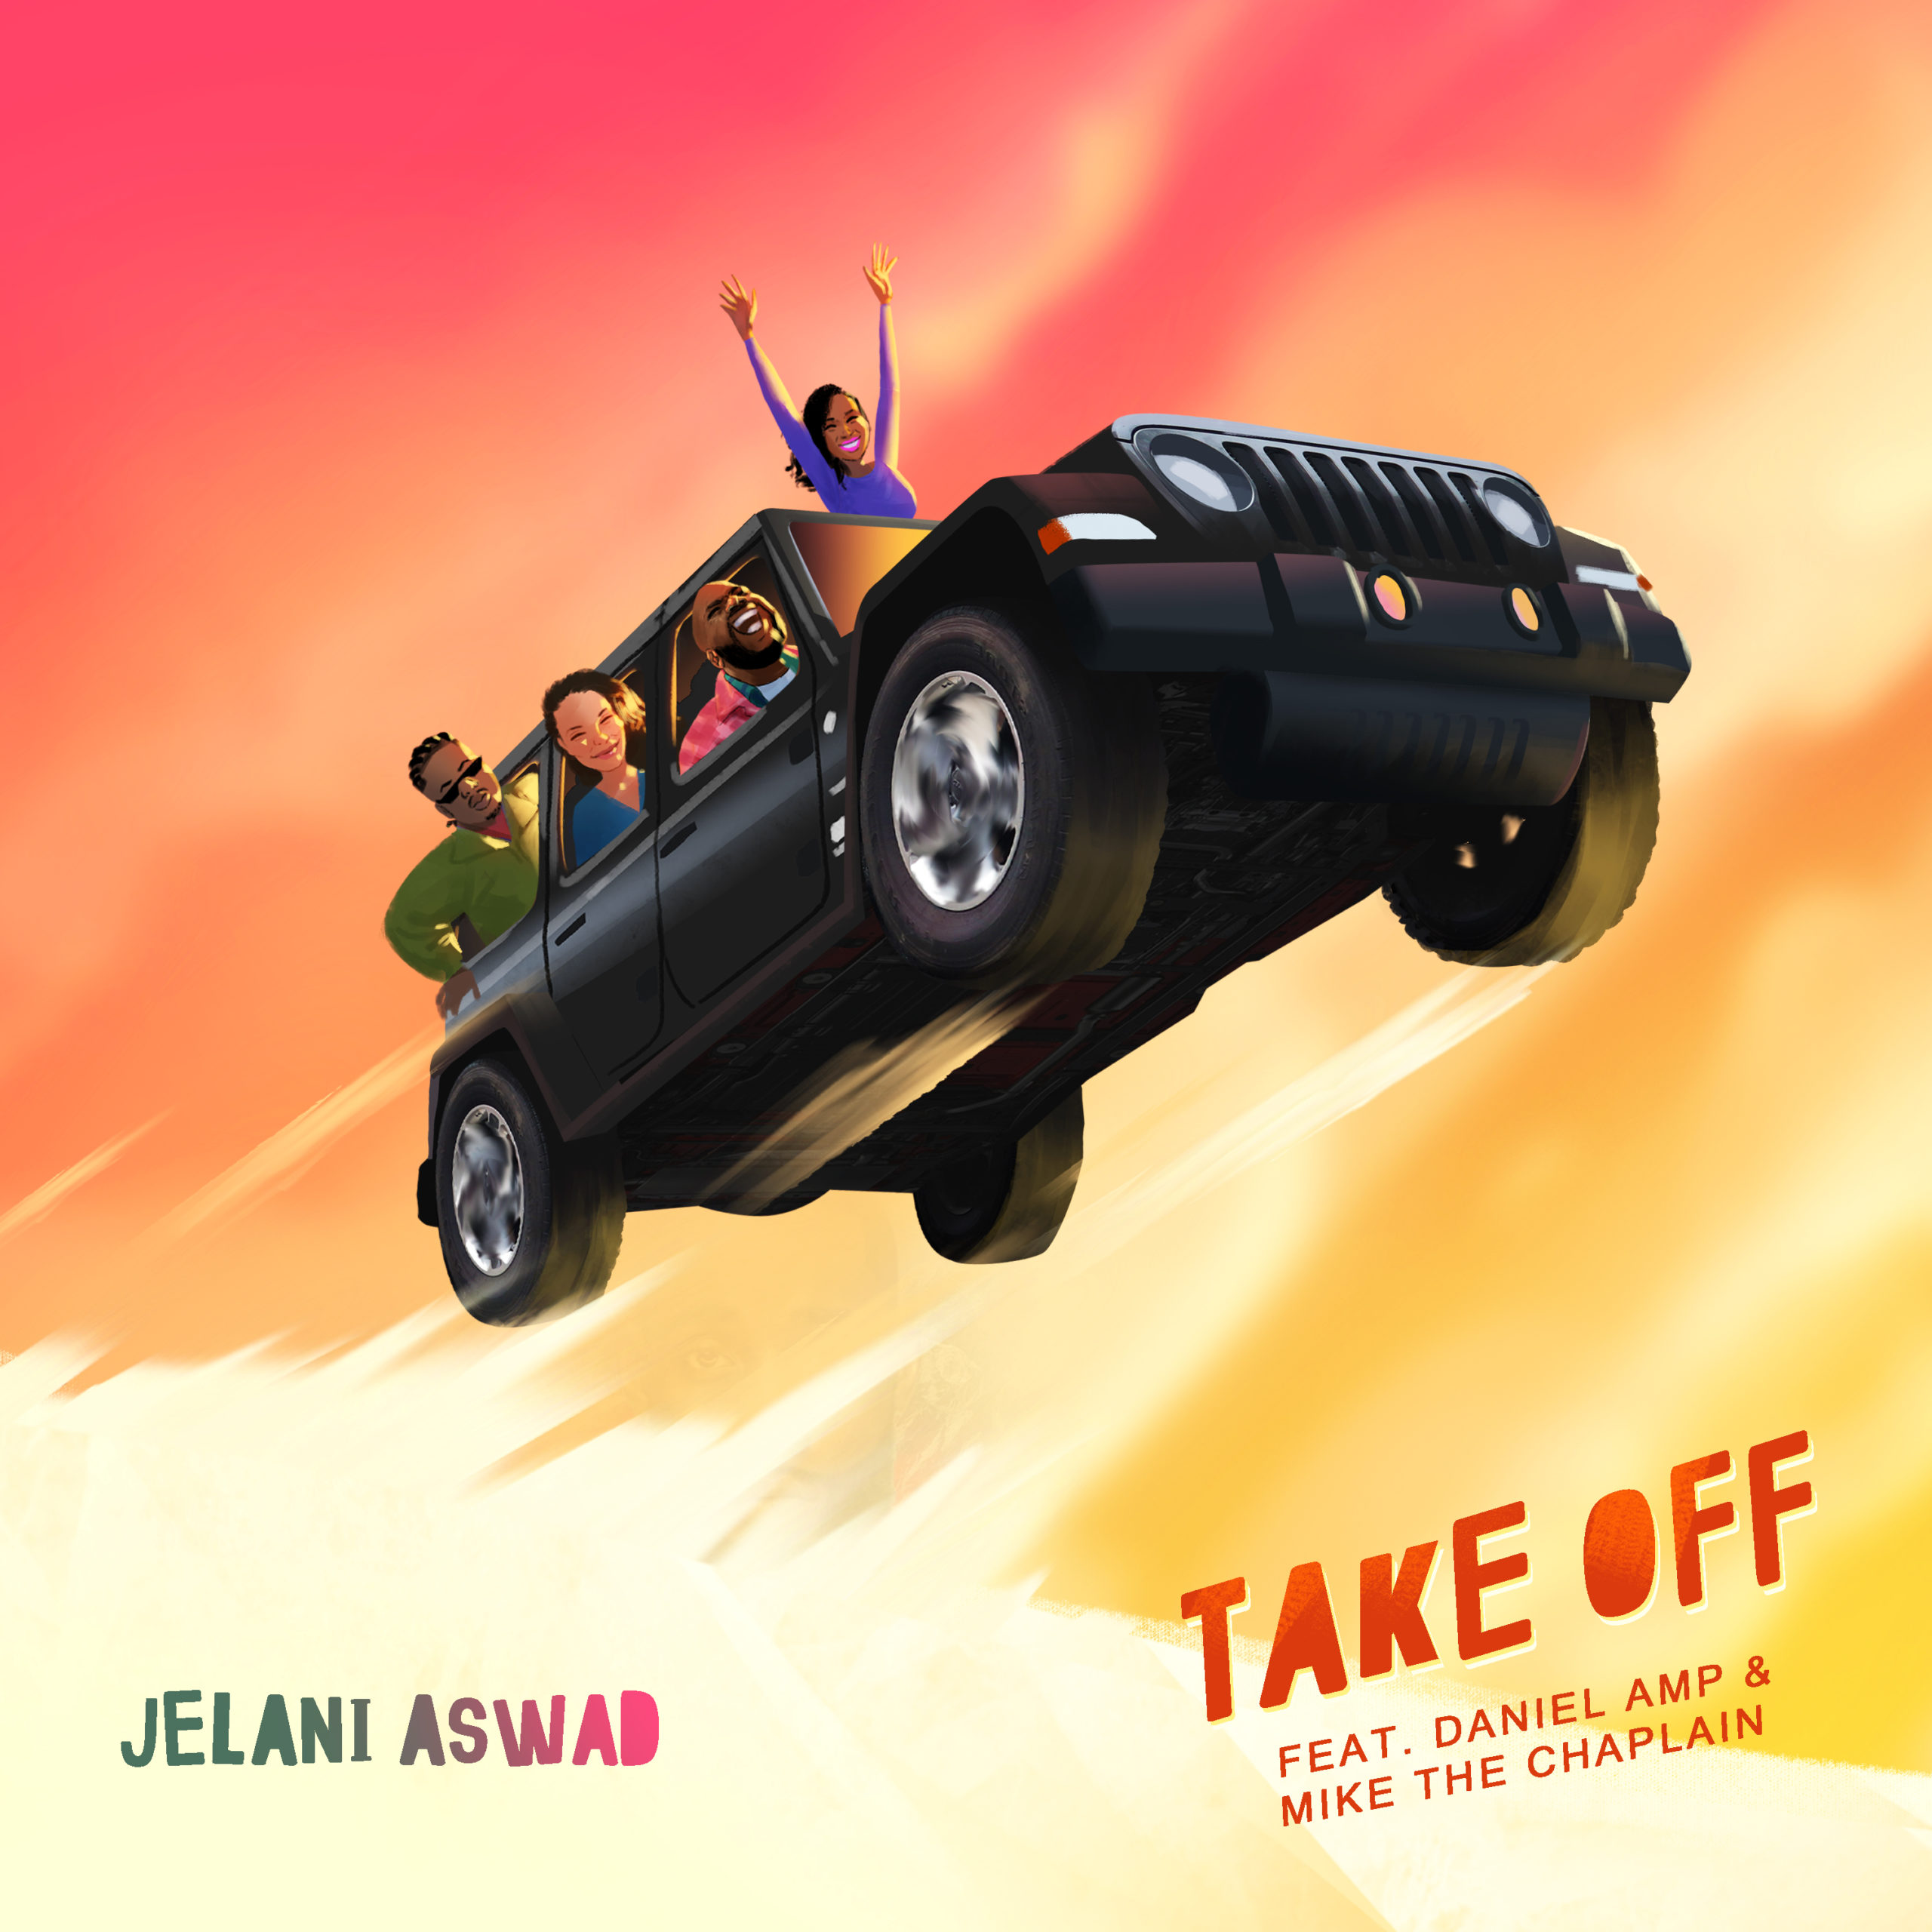 JELANI ASWAD RELEASES ‘TAKE OFF’ TODAY